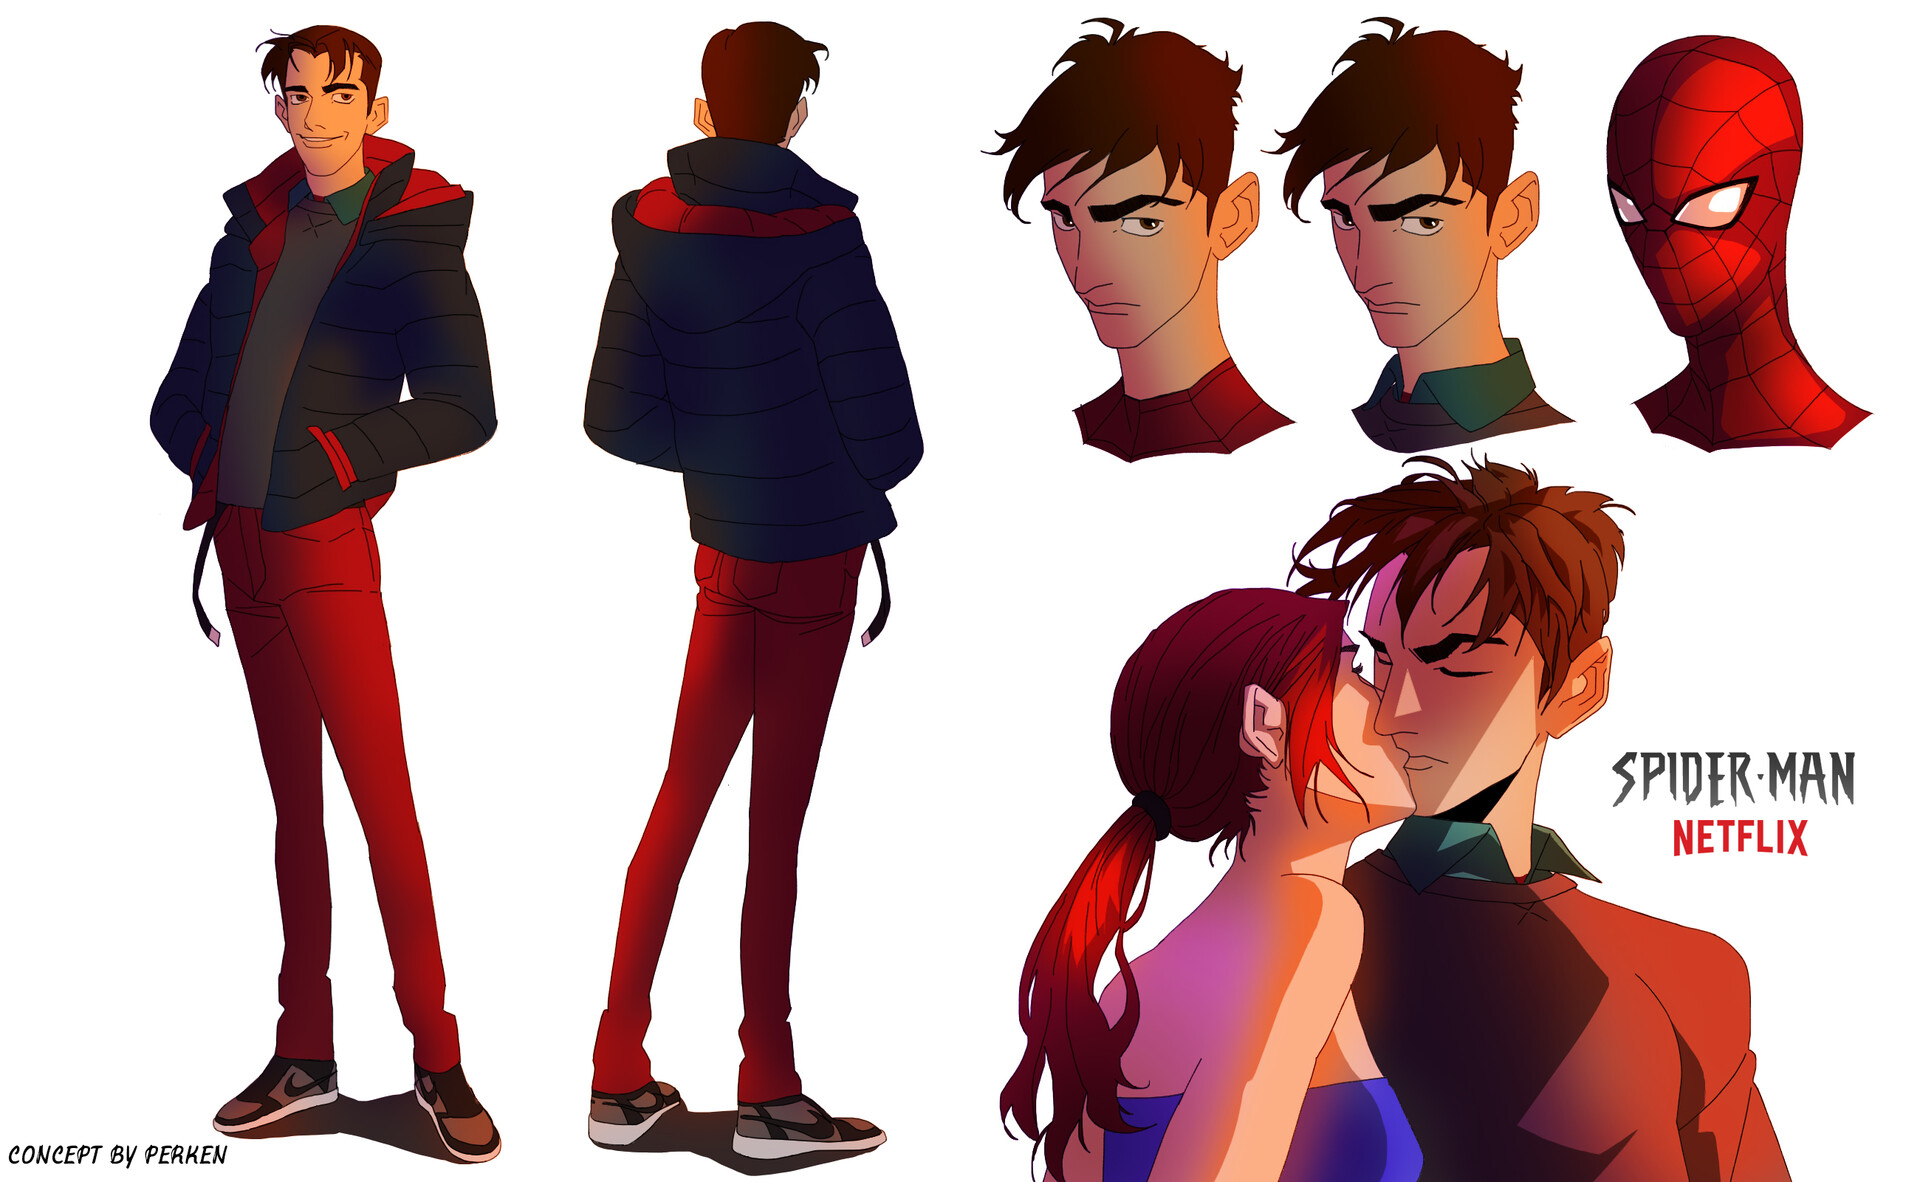 Peter Parker and Mary Jane into an anime 6 by Yesenia62702 on DeviantArt